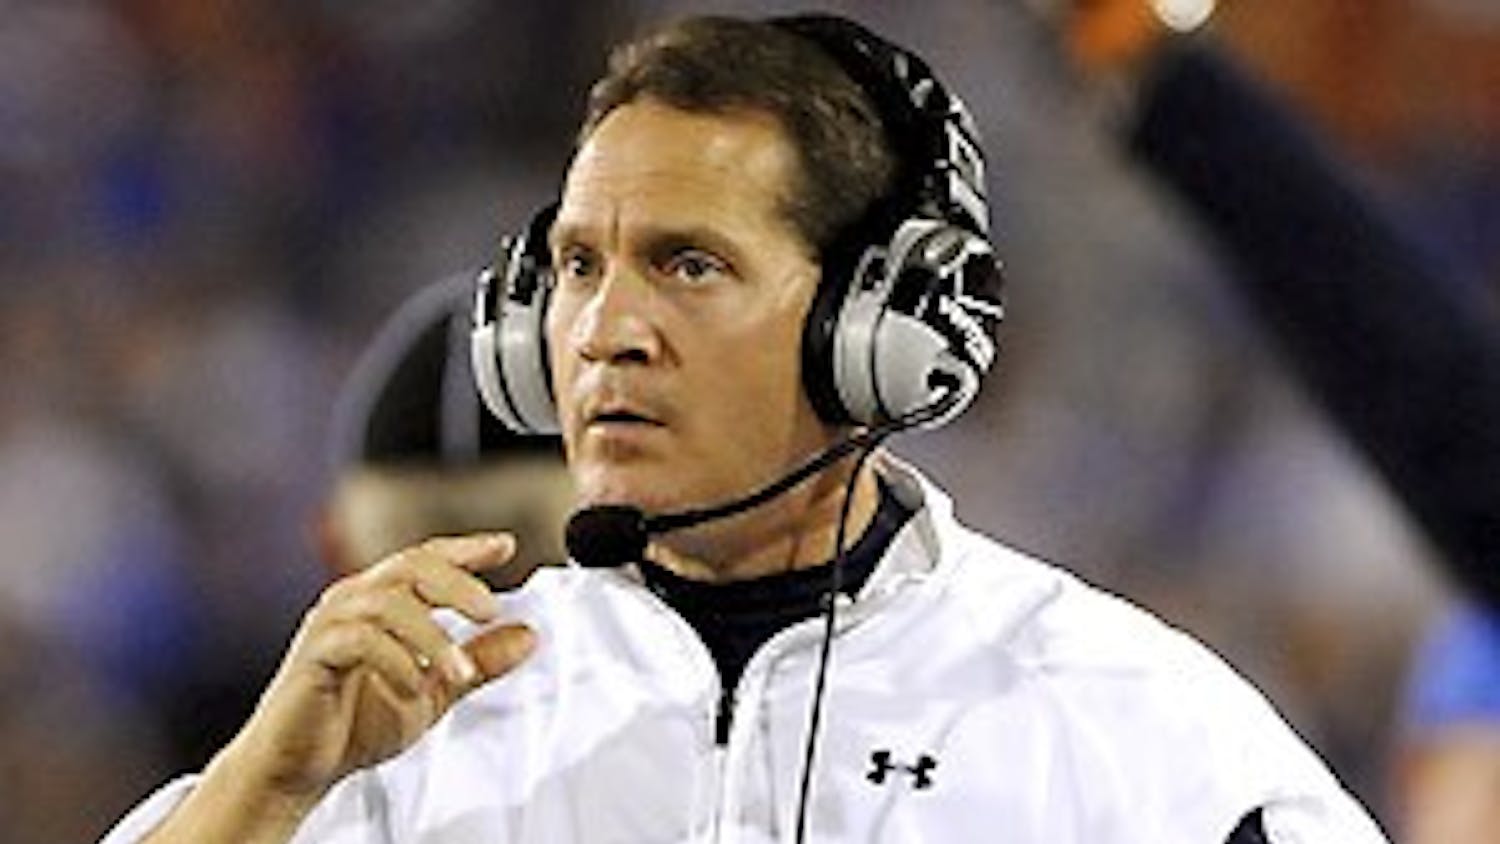 Gene Chizik, who previously worked as UNC's defensive coordinator and coached at Texas under Mack Brown, is returning to the position next season.